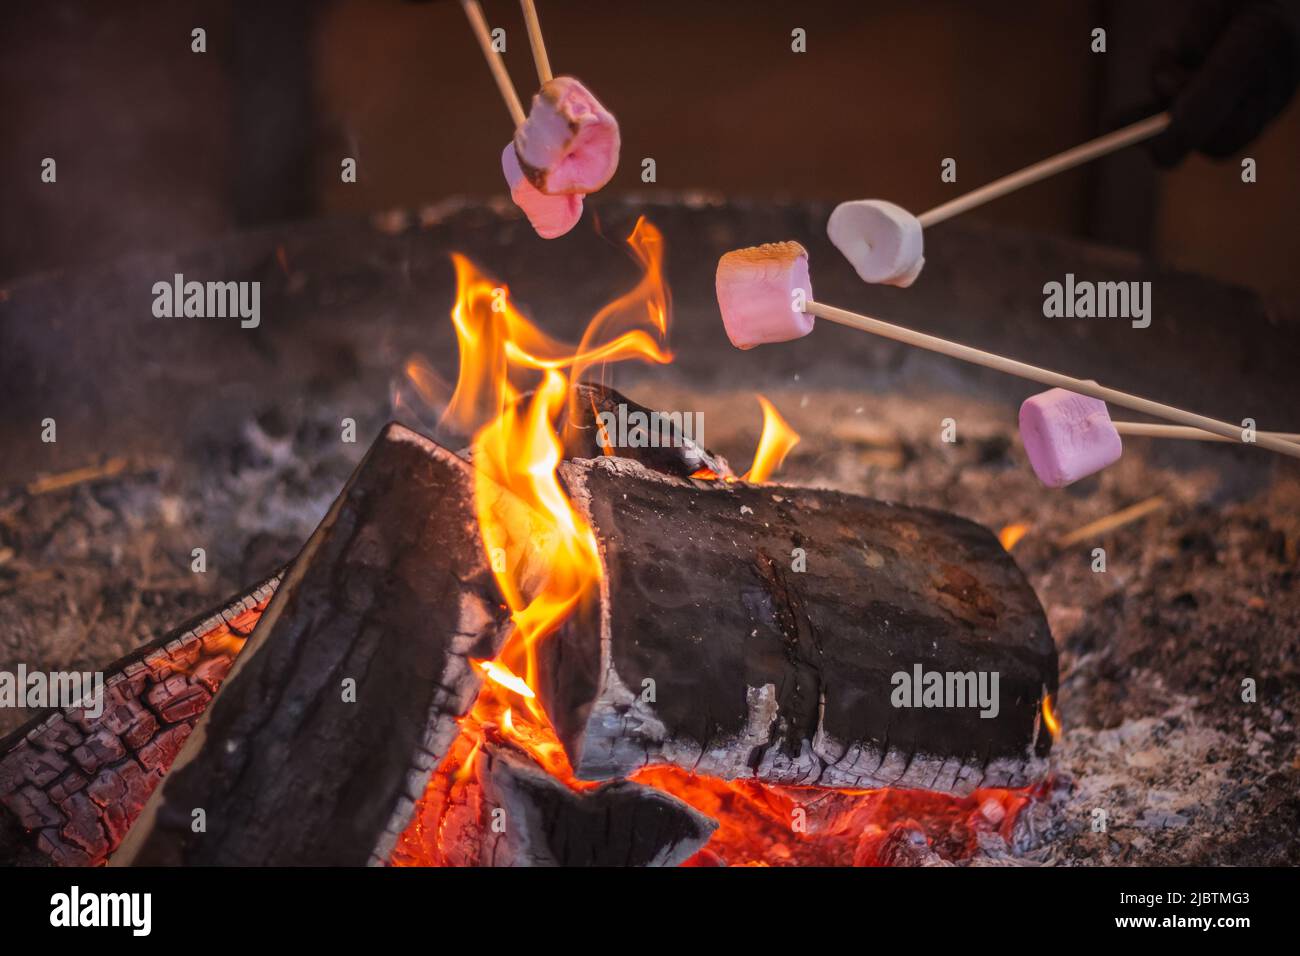 Toasting a marshmallow over an open flame at Christmas market Hyde Park Winter Wonderland in London Stock Photo